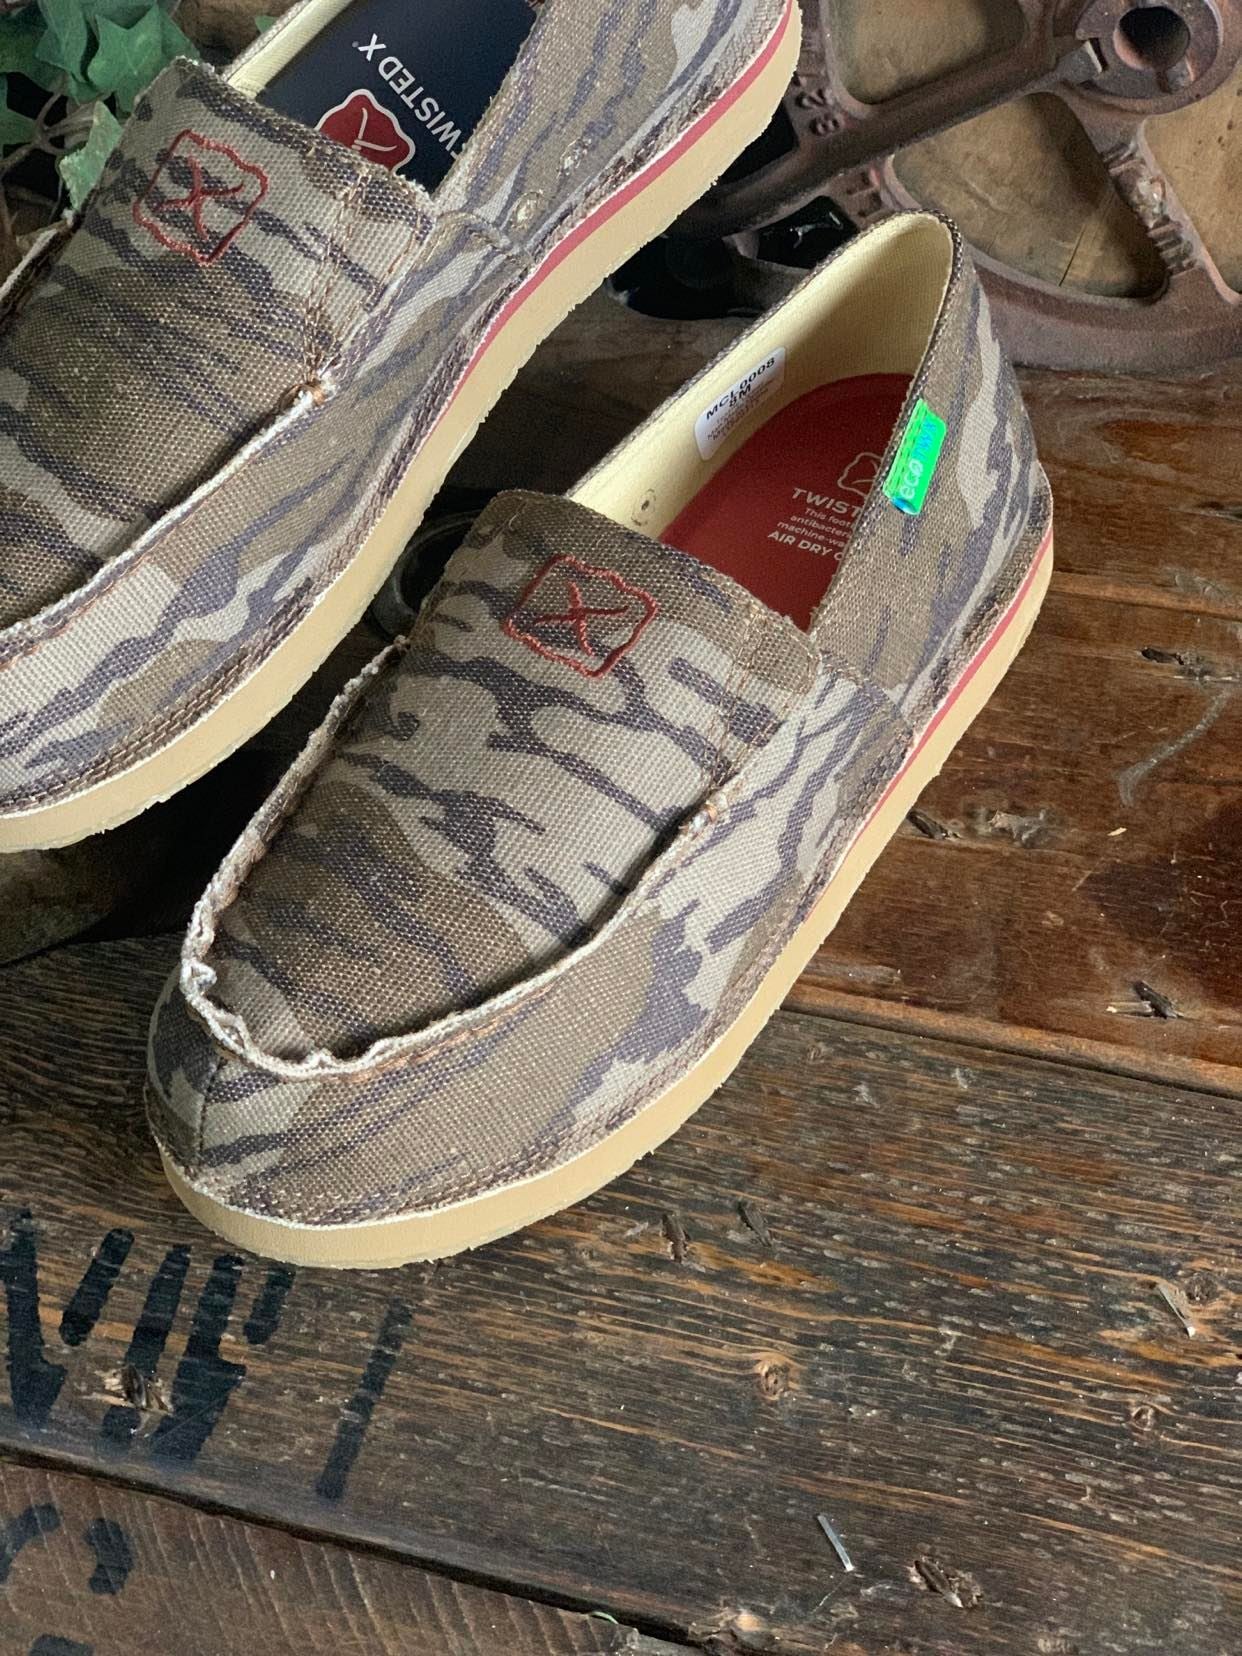 Twisted X Slip on Loafer - Mossy Oak Camo *FINAL SALE*-Men's Casual Shoes-Twisted X Boots-Lucky J Boots & More, Women's, Men's, & Kids Western Store Located in Carthage, MO